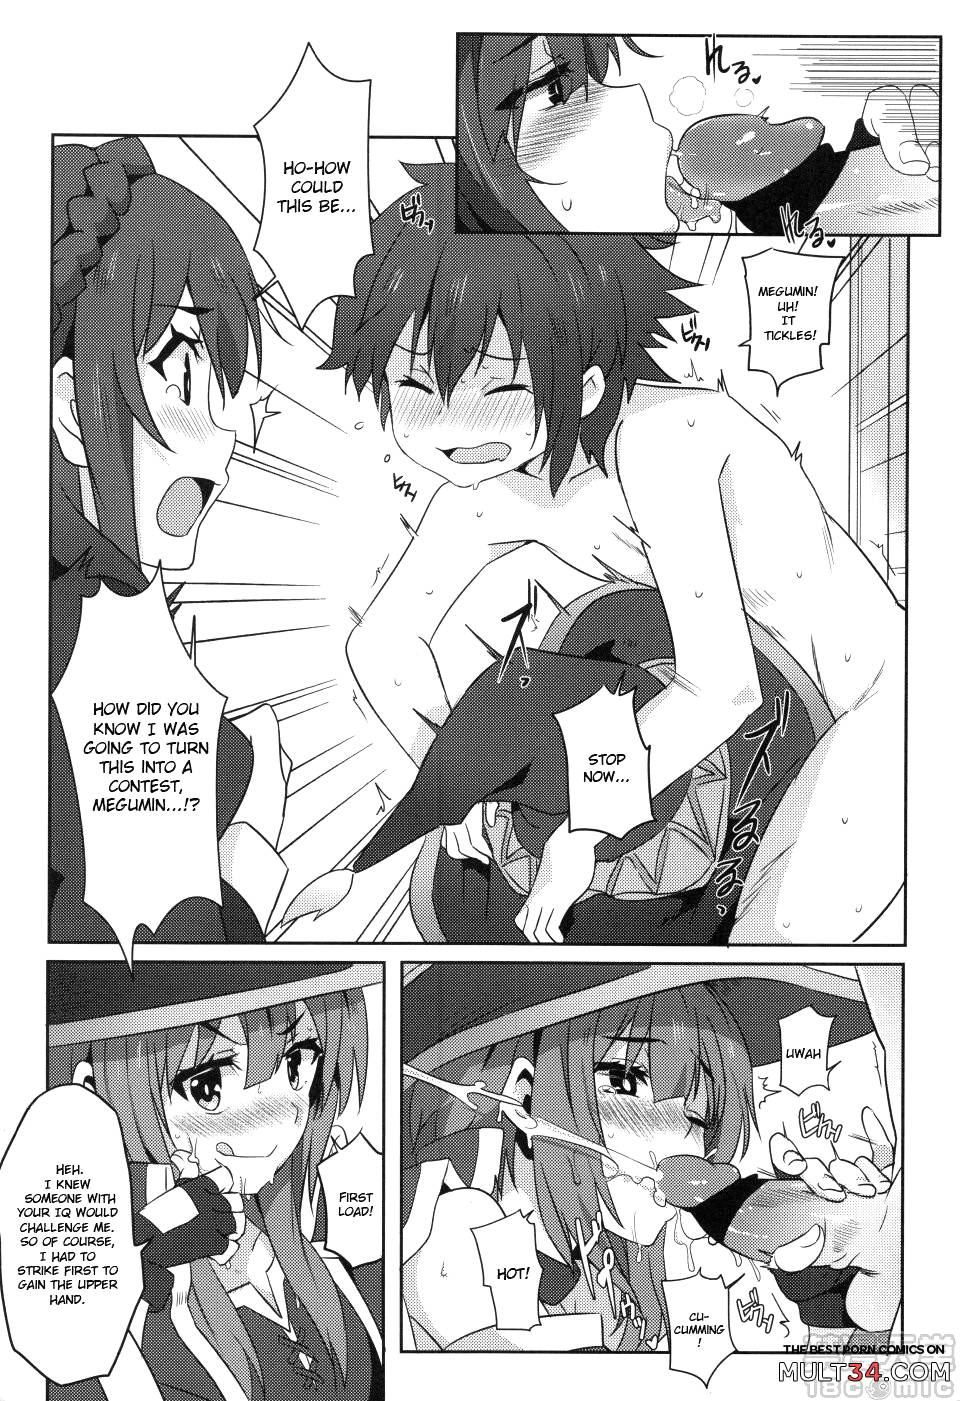 Blessing Megumin with a Magnificence Explosion! 2 page 10